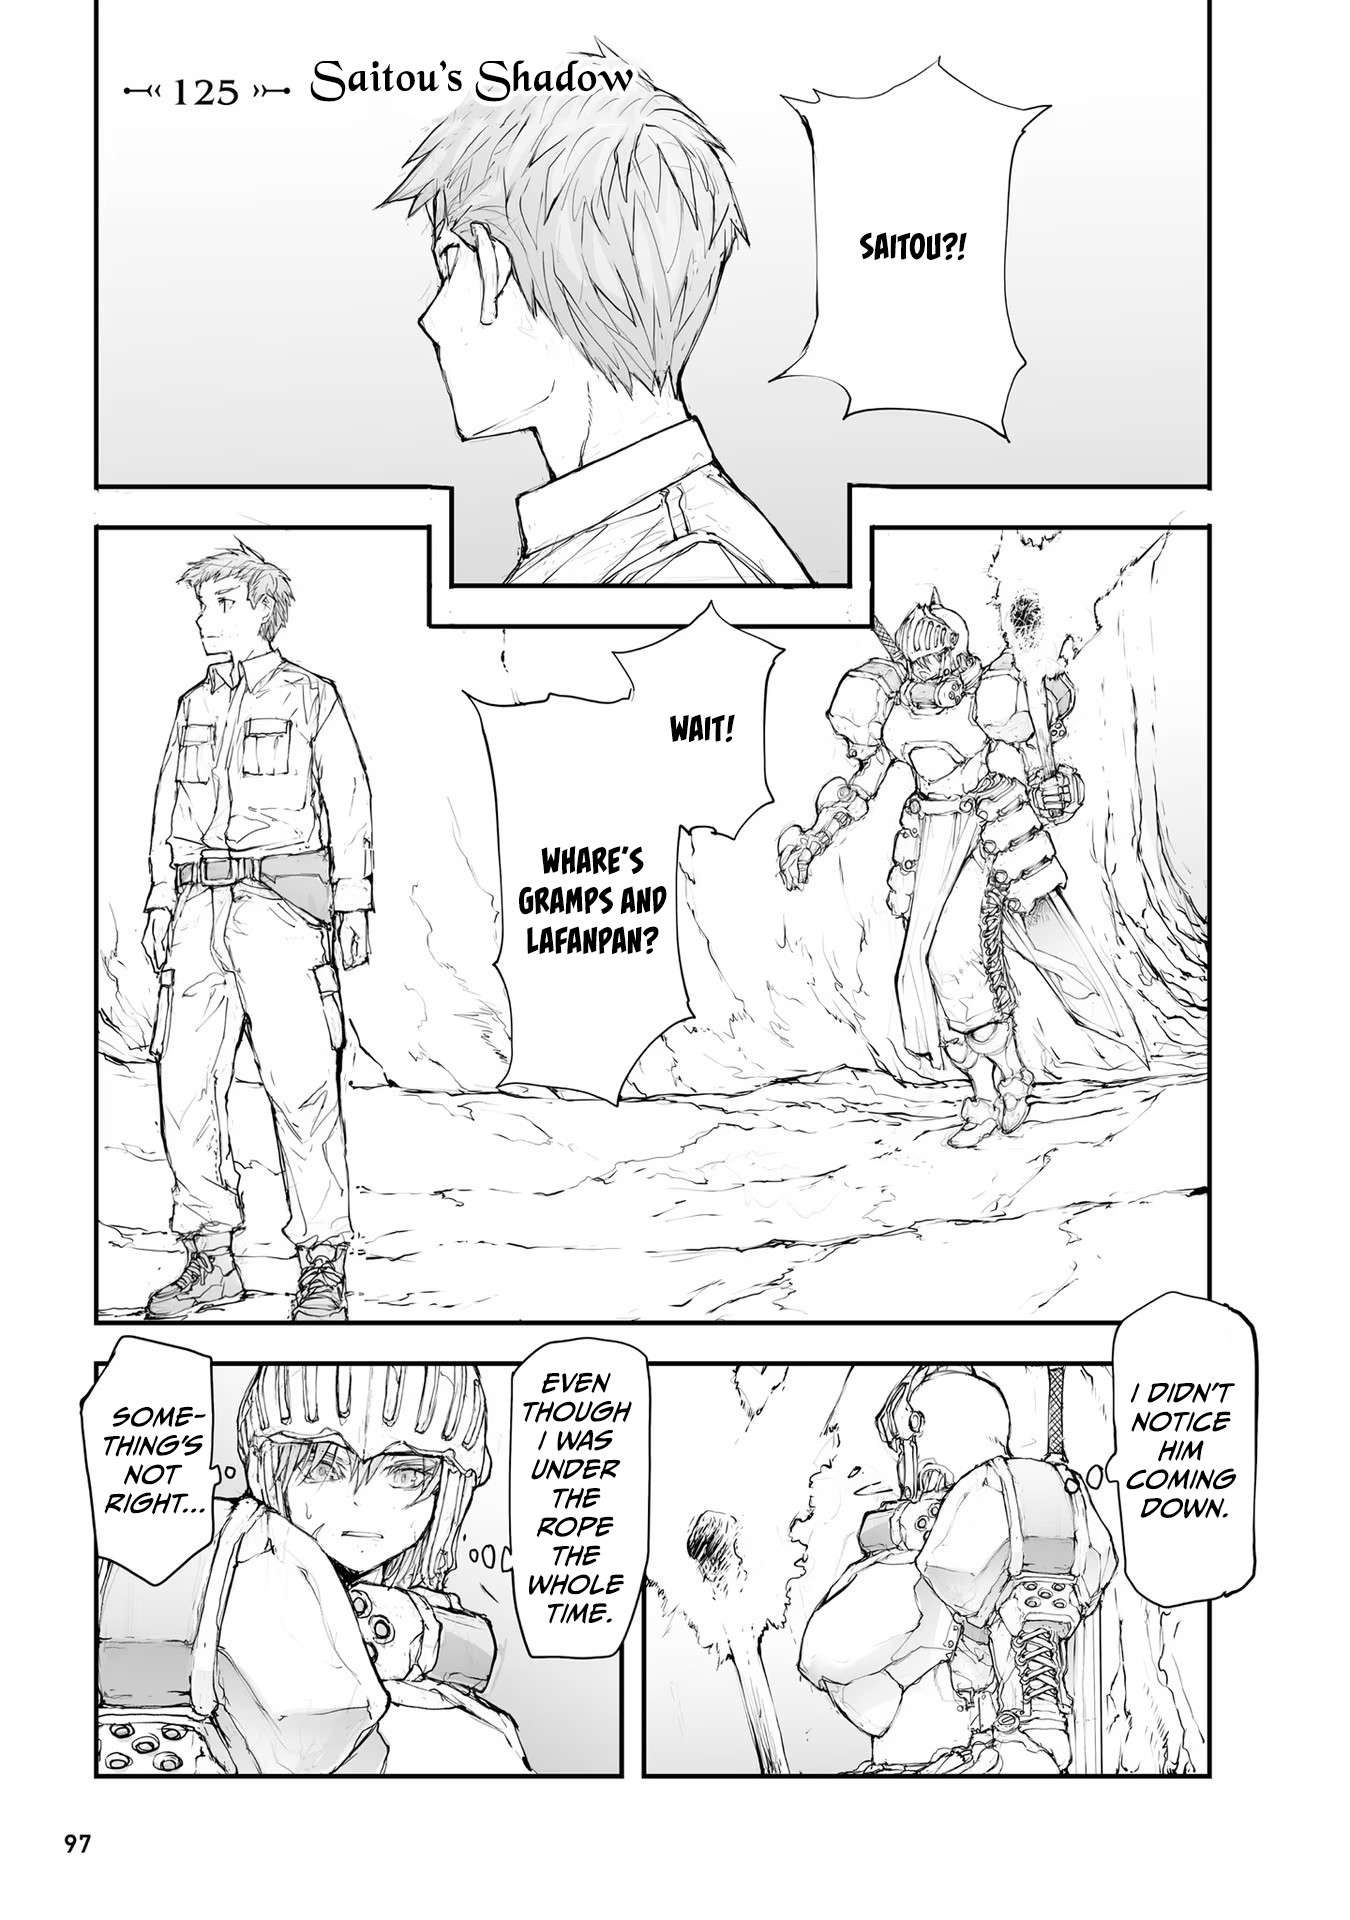 Handyman Saitou in Another World - chapter 125 - #2